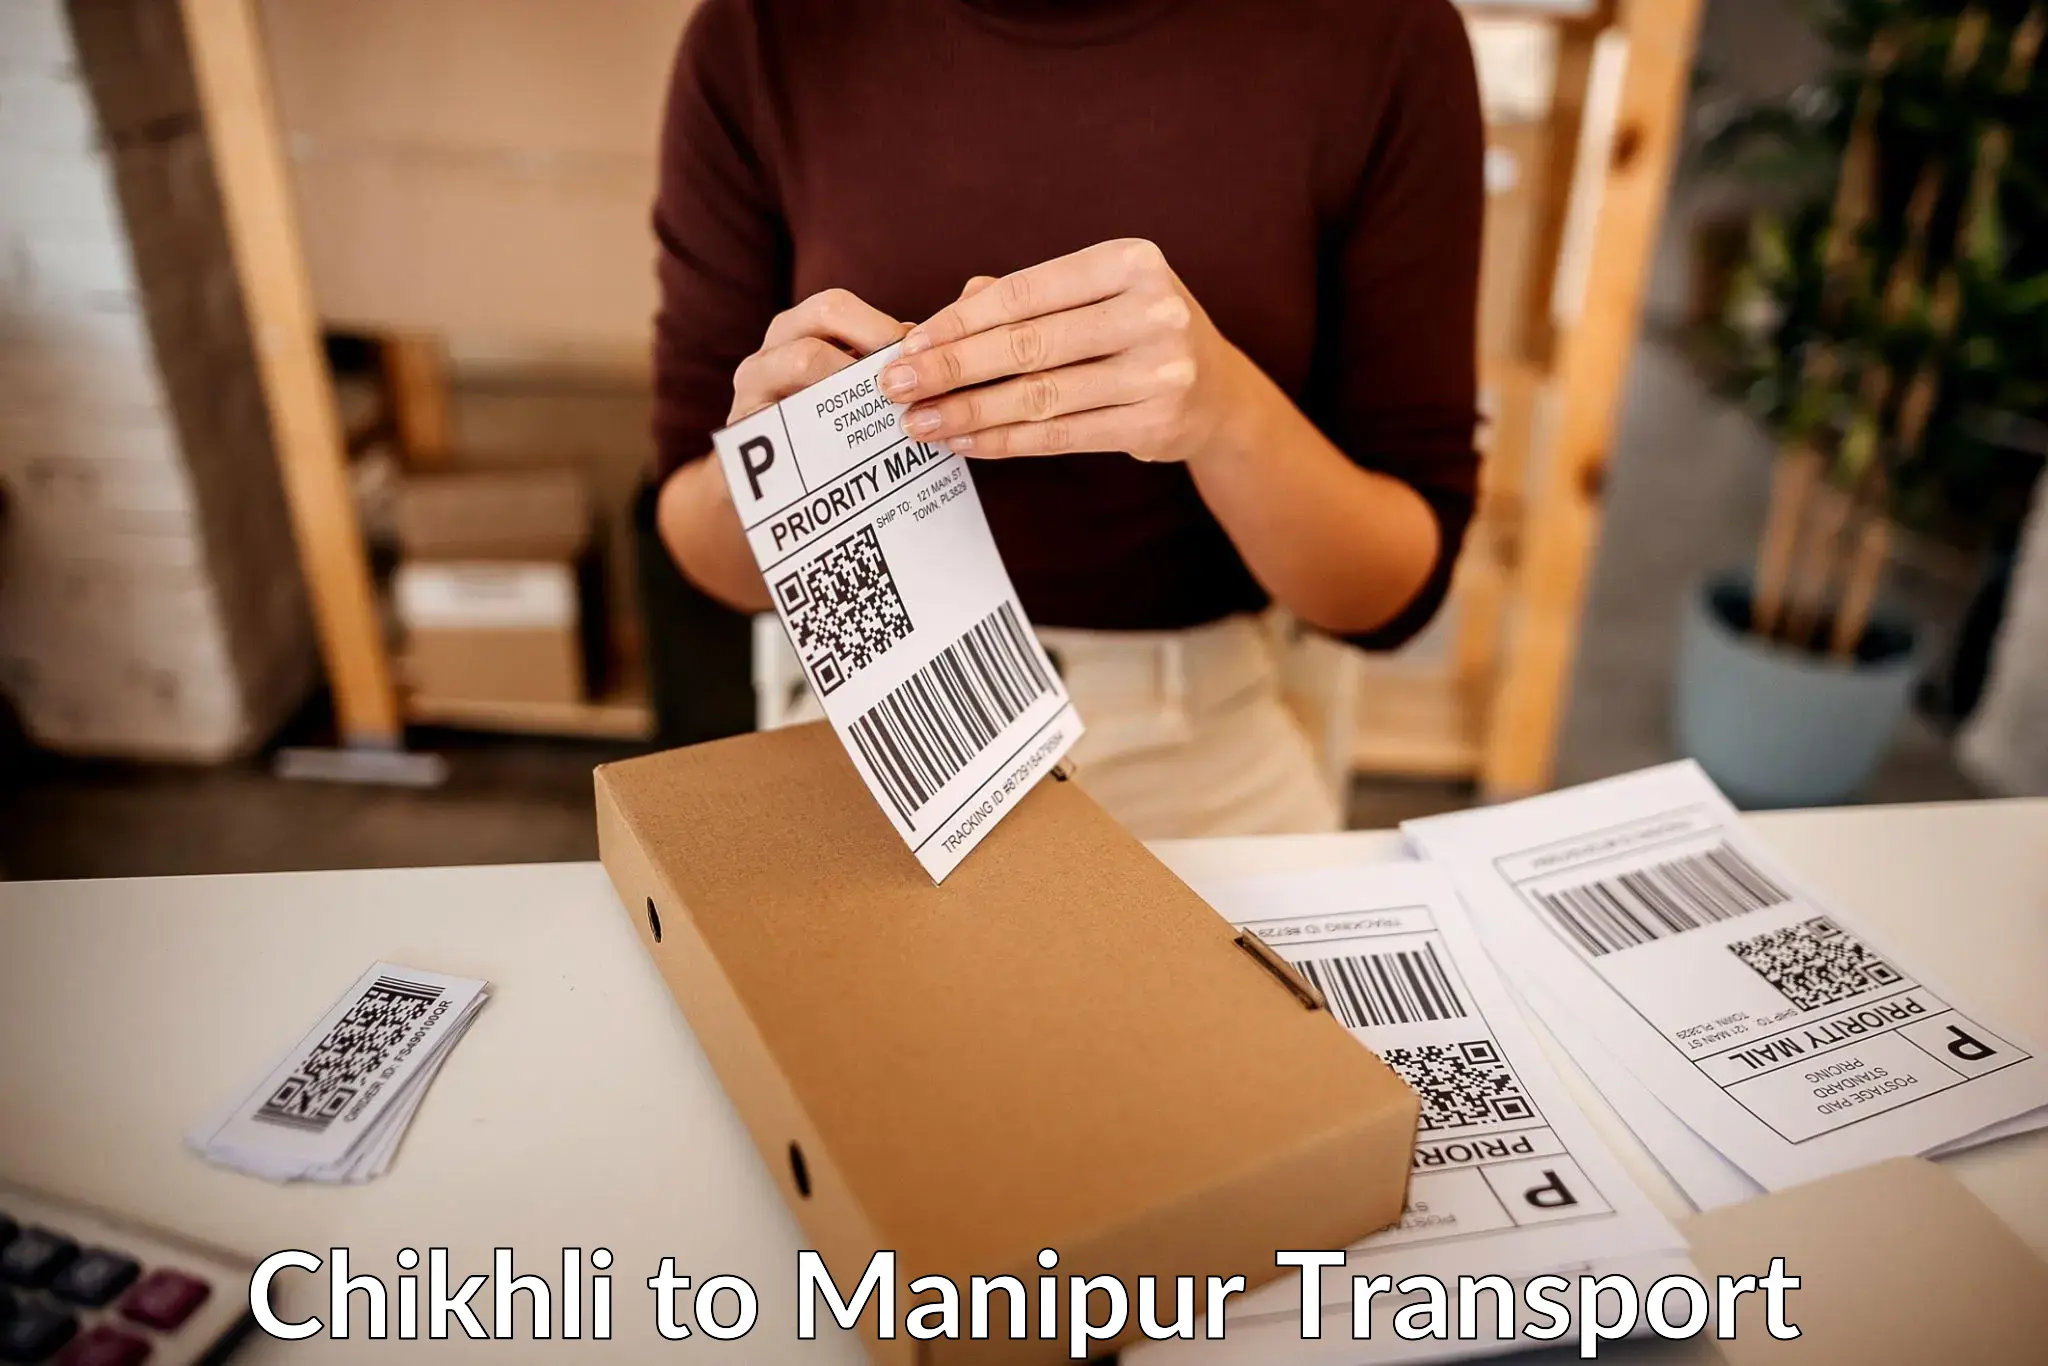 Commercial transport service Chikhli to Manipur